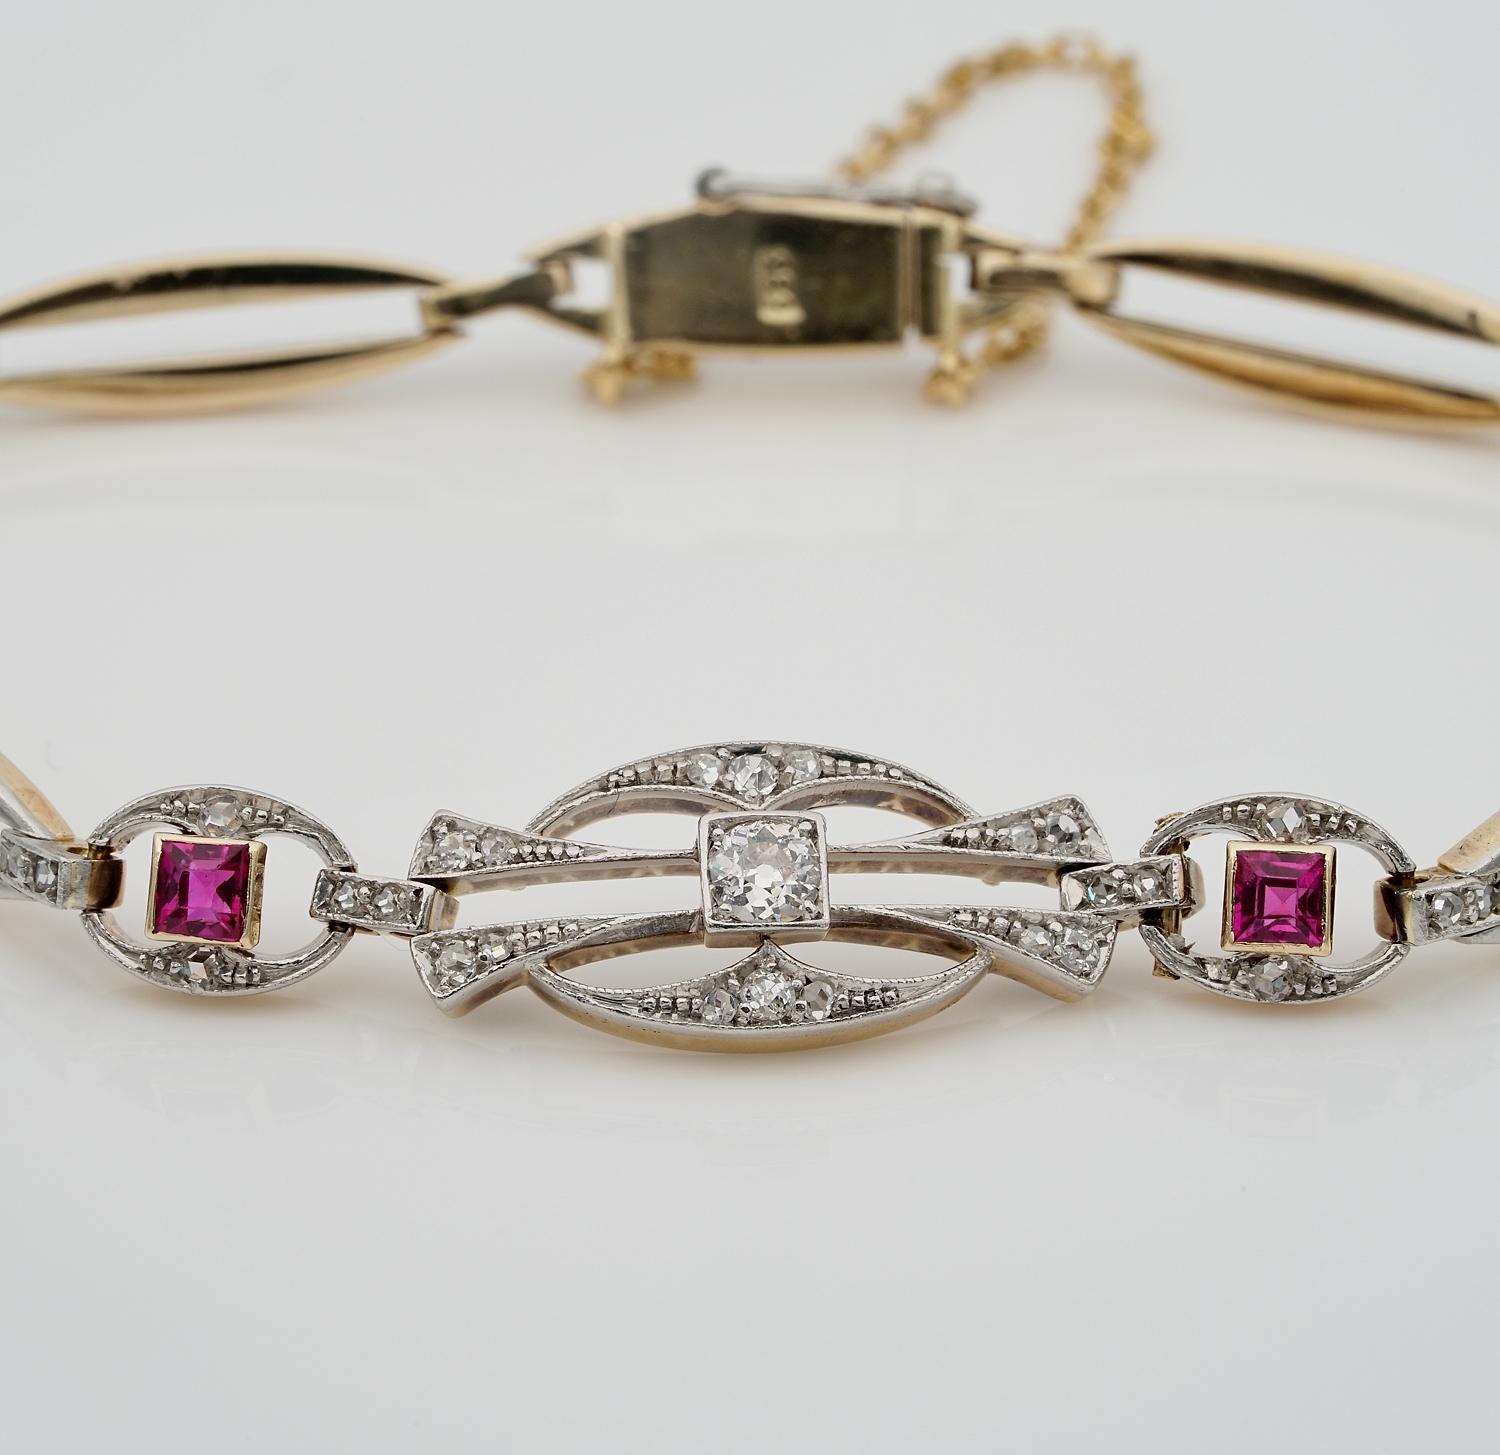 Lace Elegance

This delightful Edwardian era bracelet displays refined elegance typical of the beginning of last century 1905 ca 
Gorgeous substantial in weight links meet at the centre with a charming lace work expressing grace and femininity as in